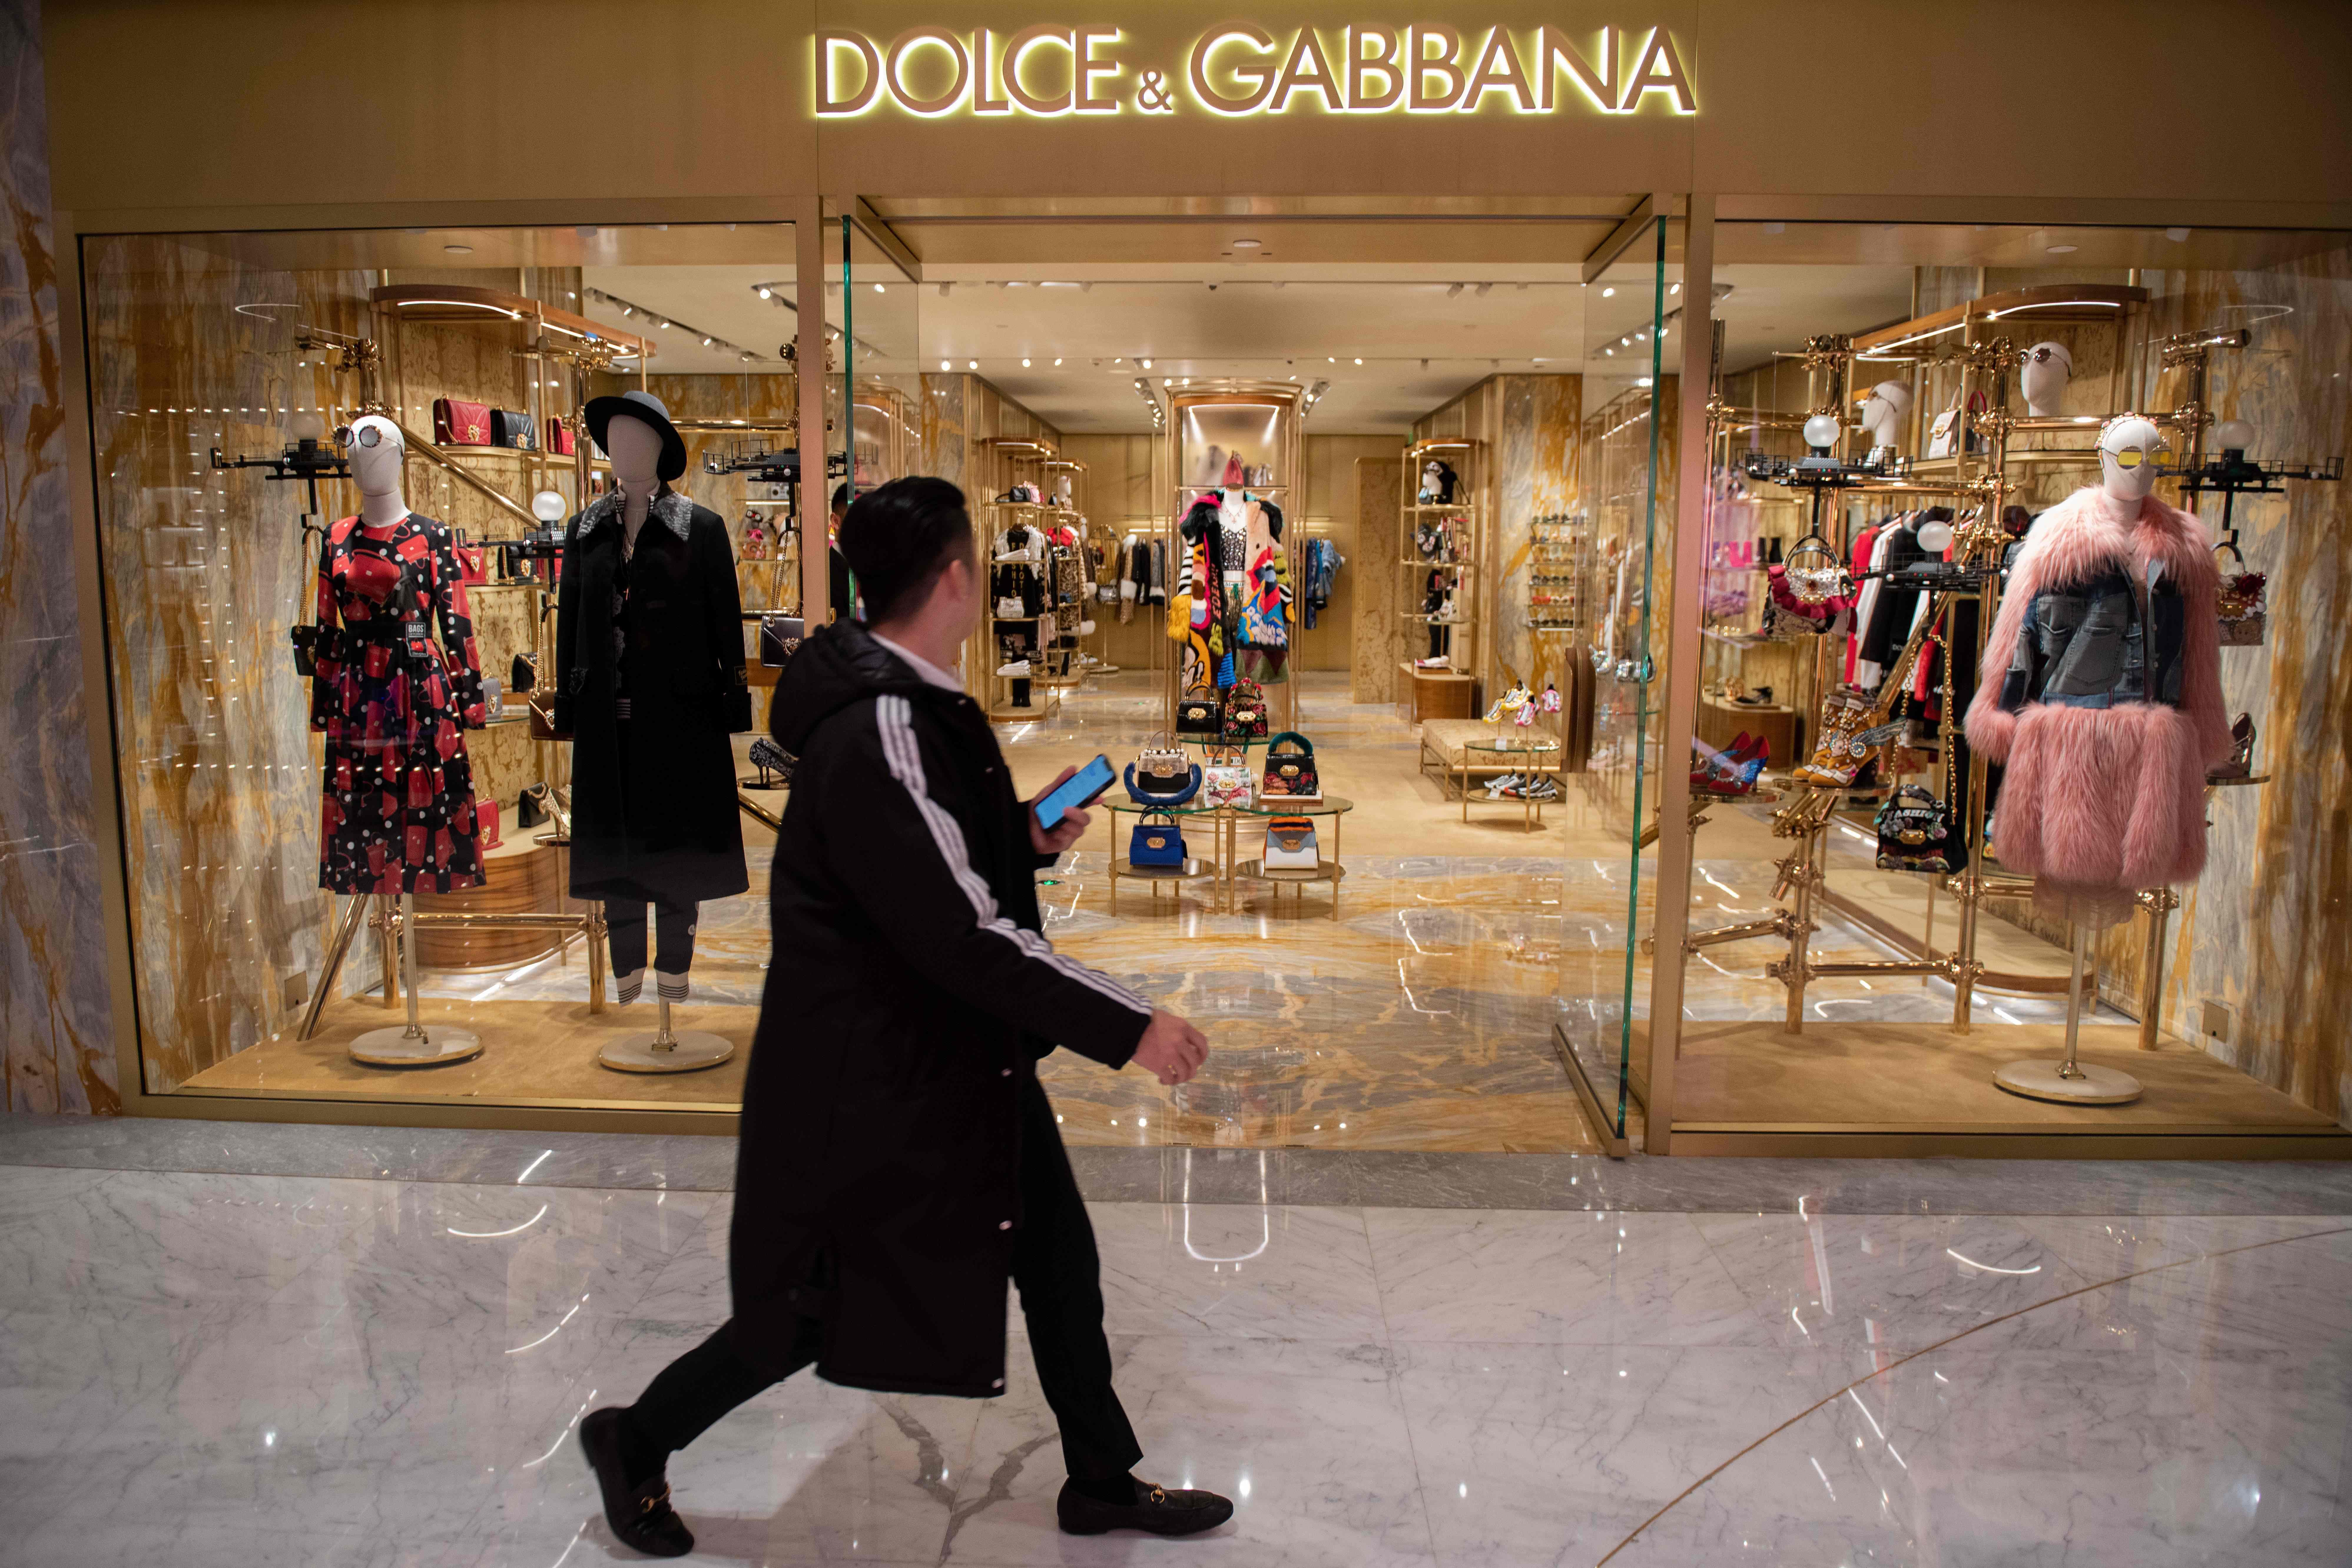 Dolce and Gabbana apologize following 